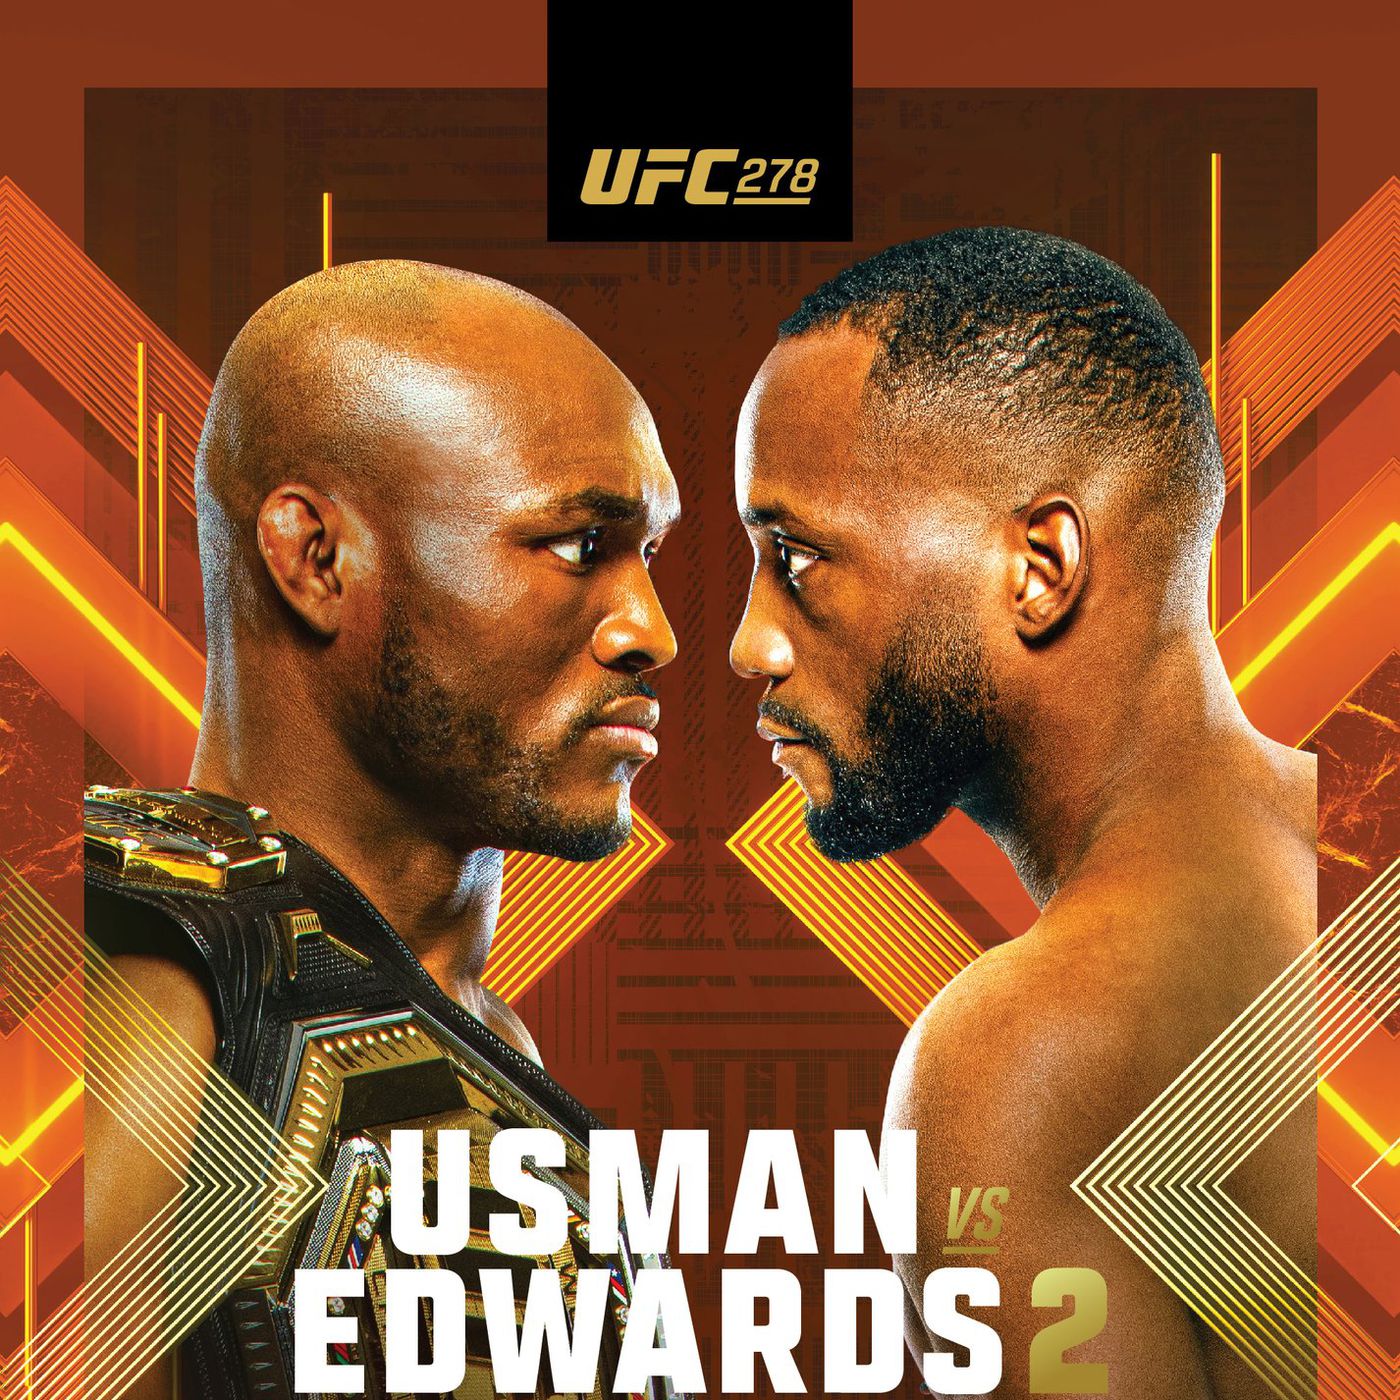 UFC 278 poster pic is 'bringing the heat' for Usman vs. Edwards 2 in Salt Lake City - MMAmania.com